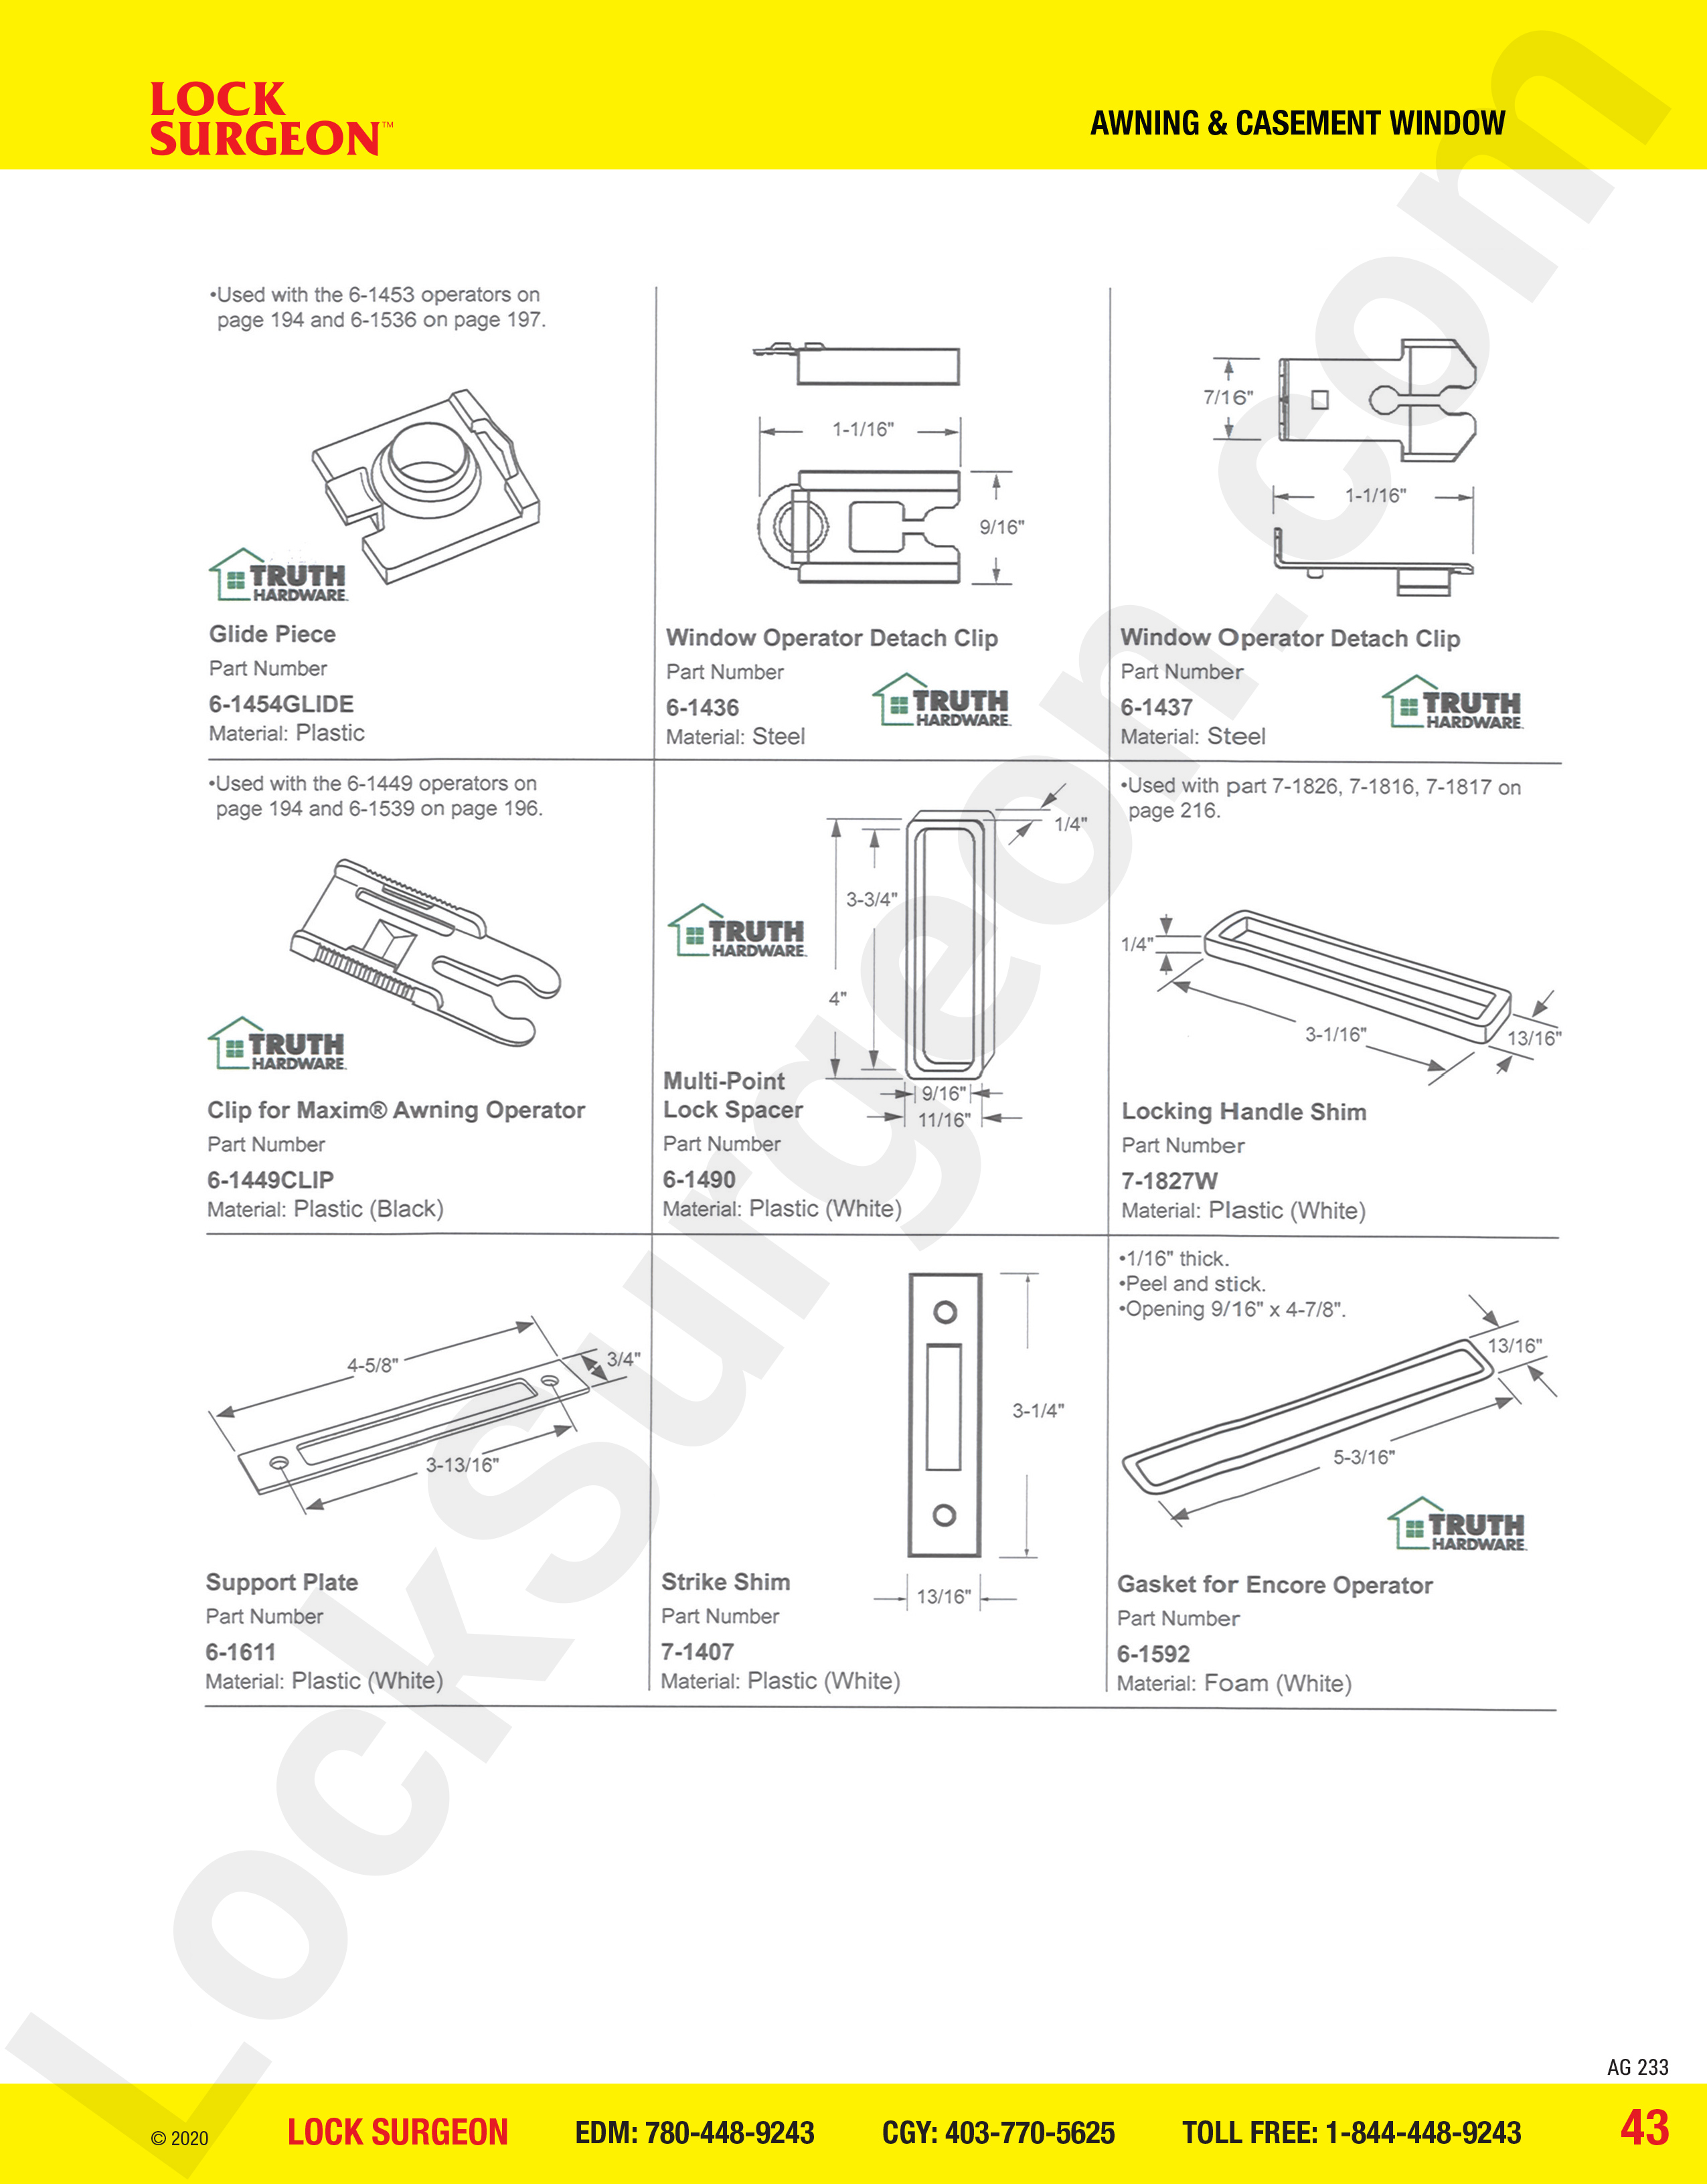 awning and casement window parts for clips, shims and spacers